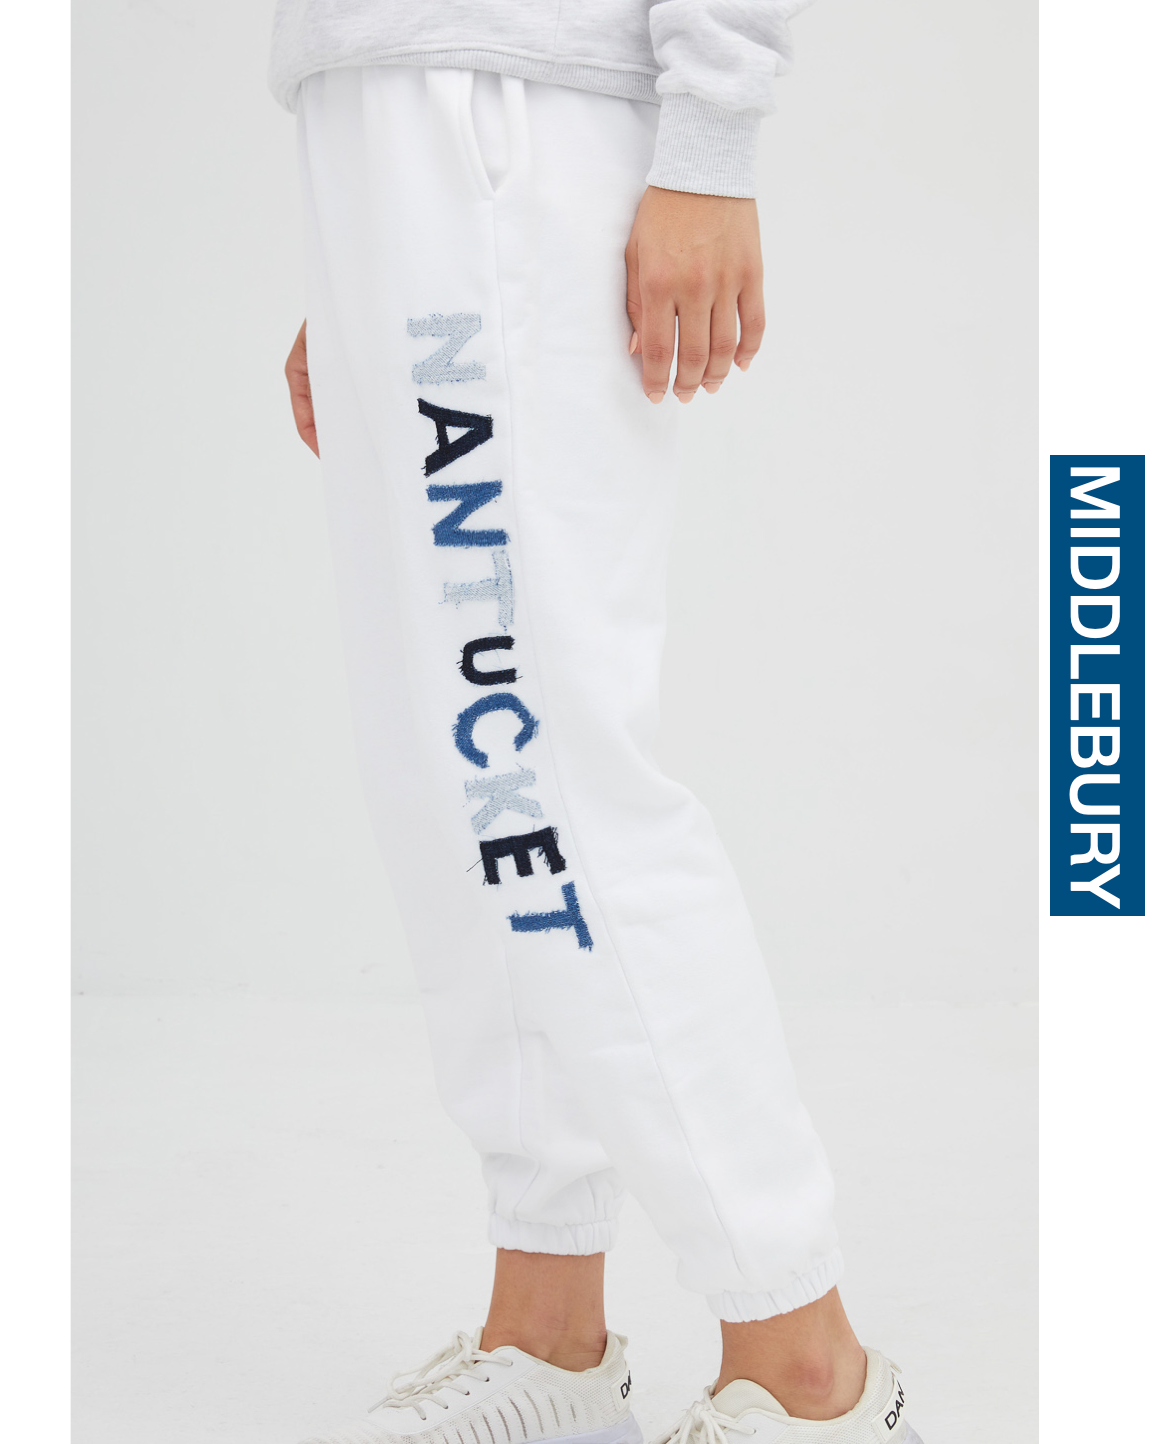 Model wearing Unemployed Denim Letter Sweatpants saying MIDDLEBURY in white on a white background